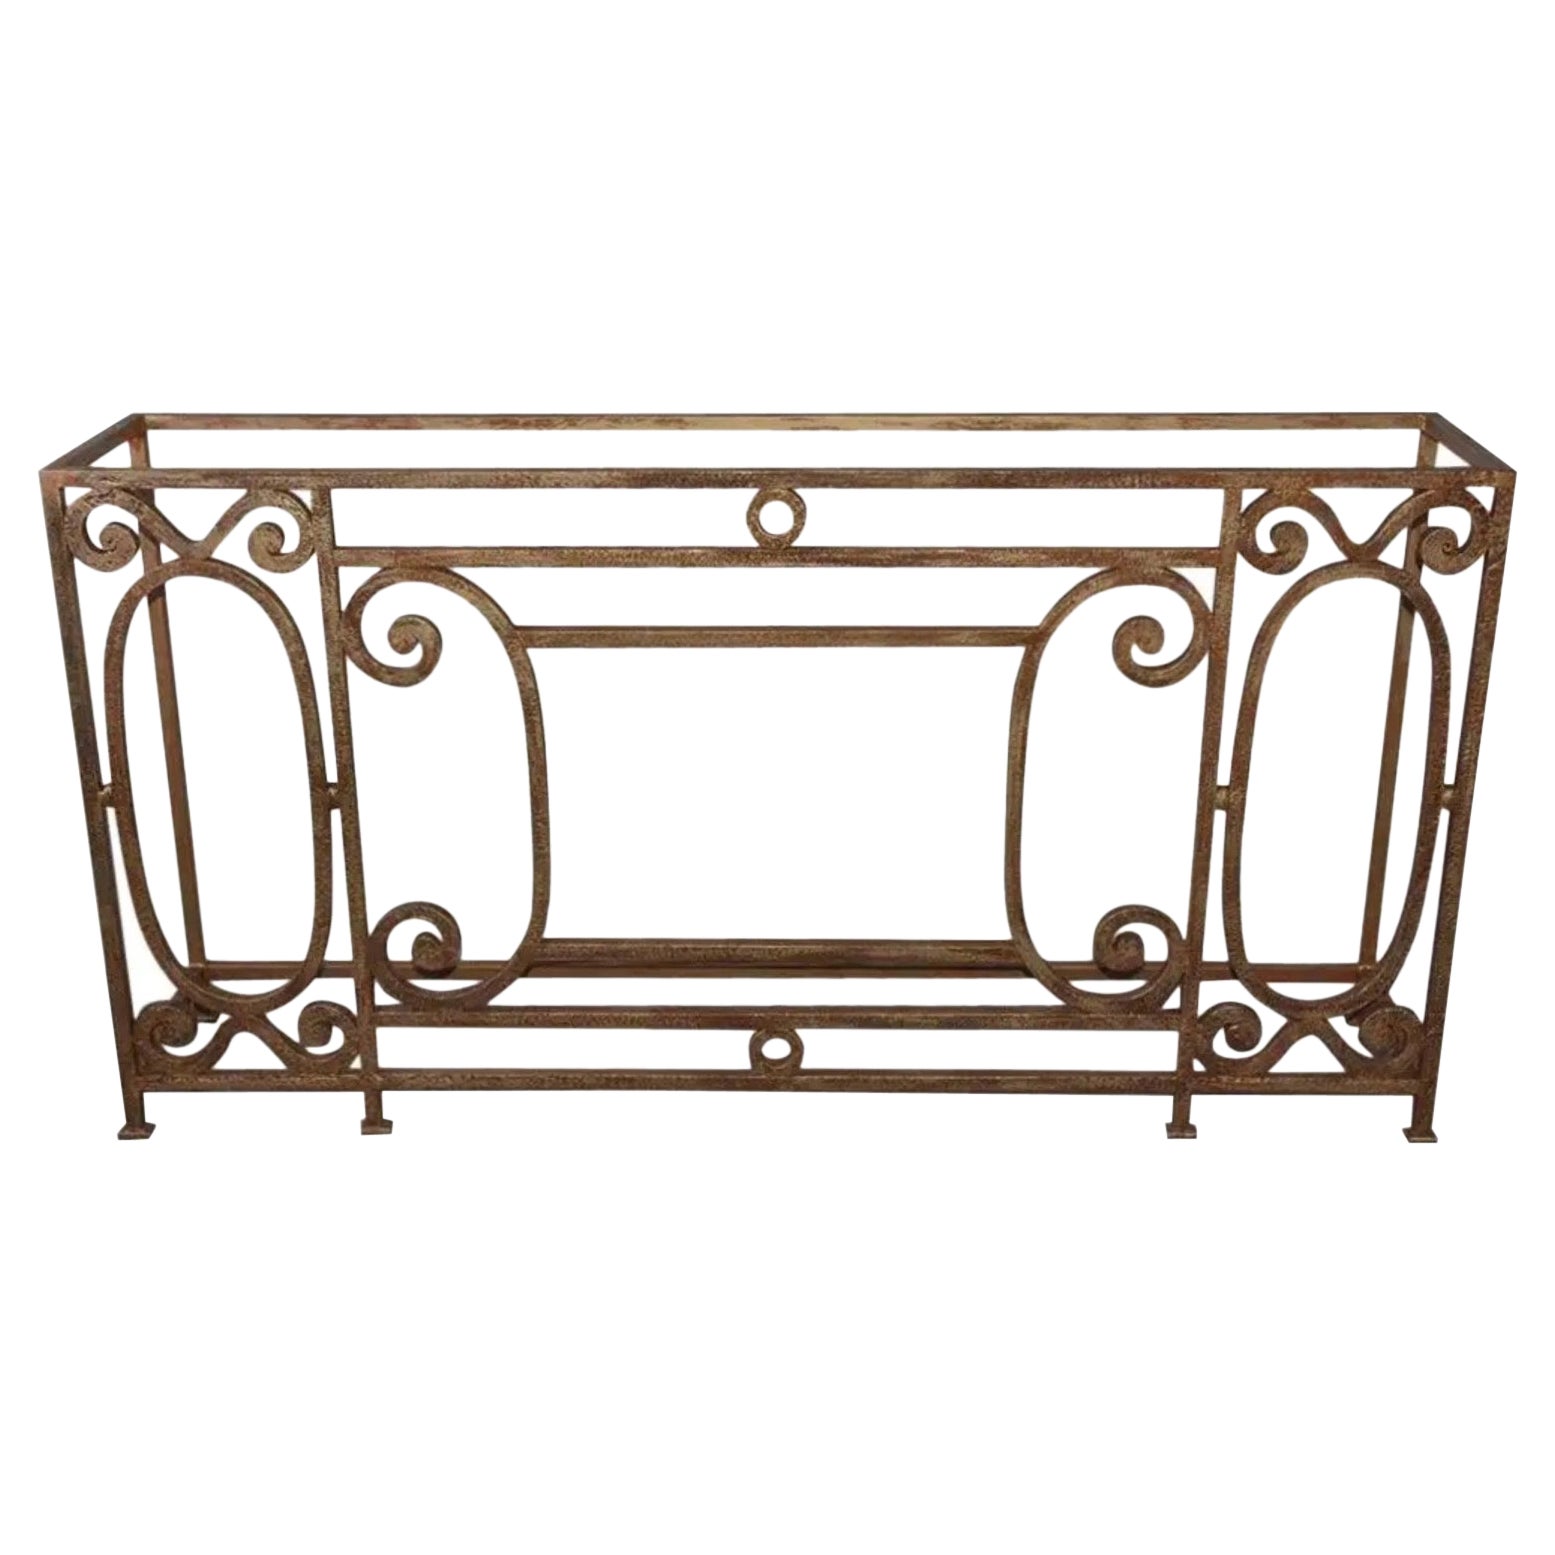 Custom Baroque-Style Wrought Iron Console Table or Server Base For Sale